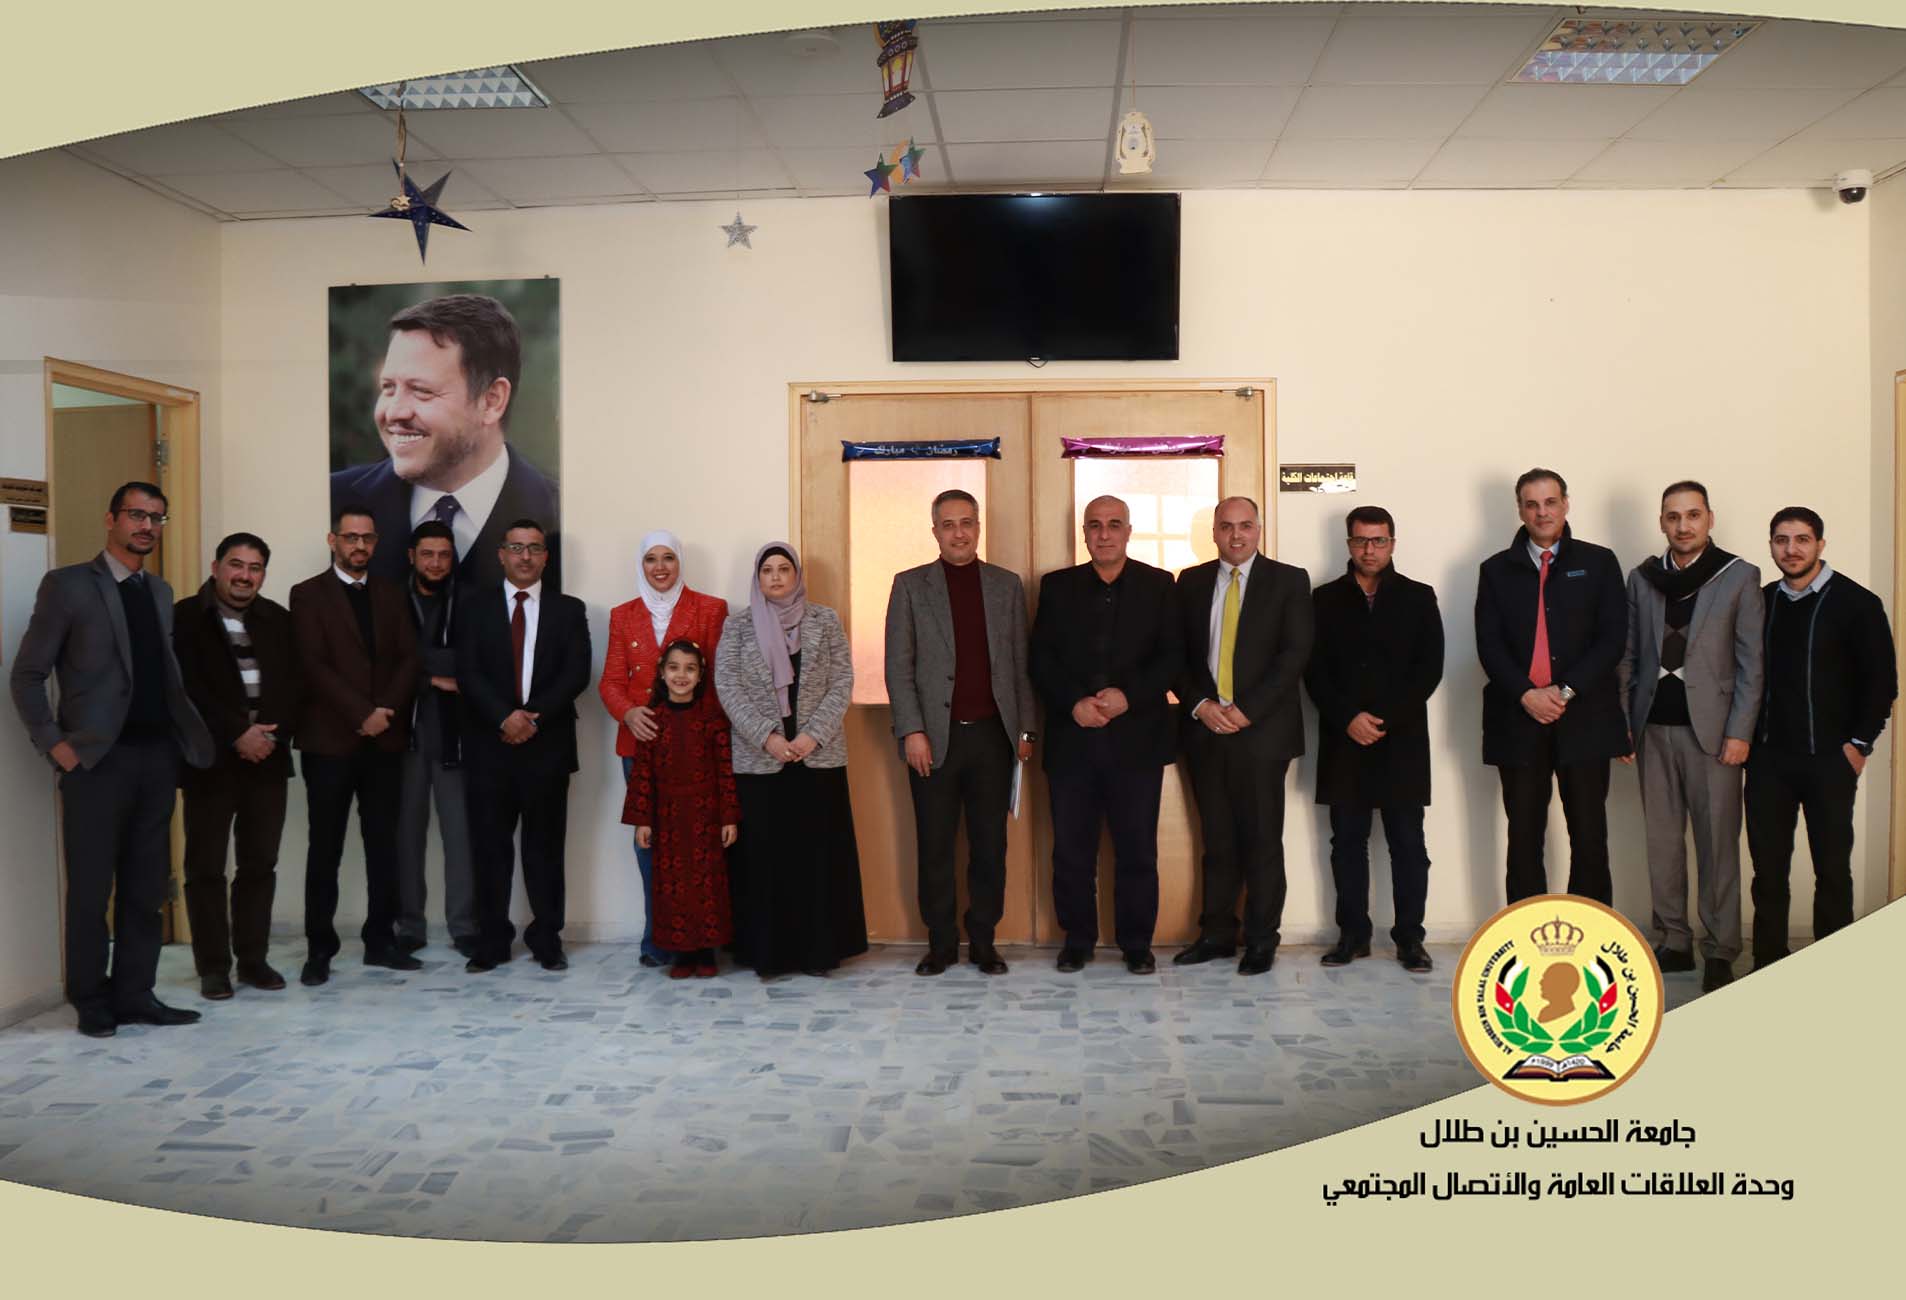 The President of Al-Hussein Bin Talal University inaugurates the Internet of Things Laboratory and meets faculty members at the Faculty of Information Technology.